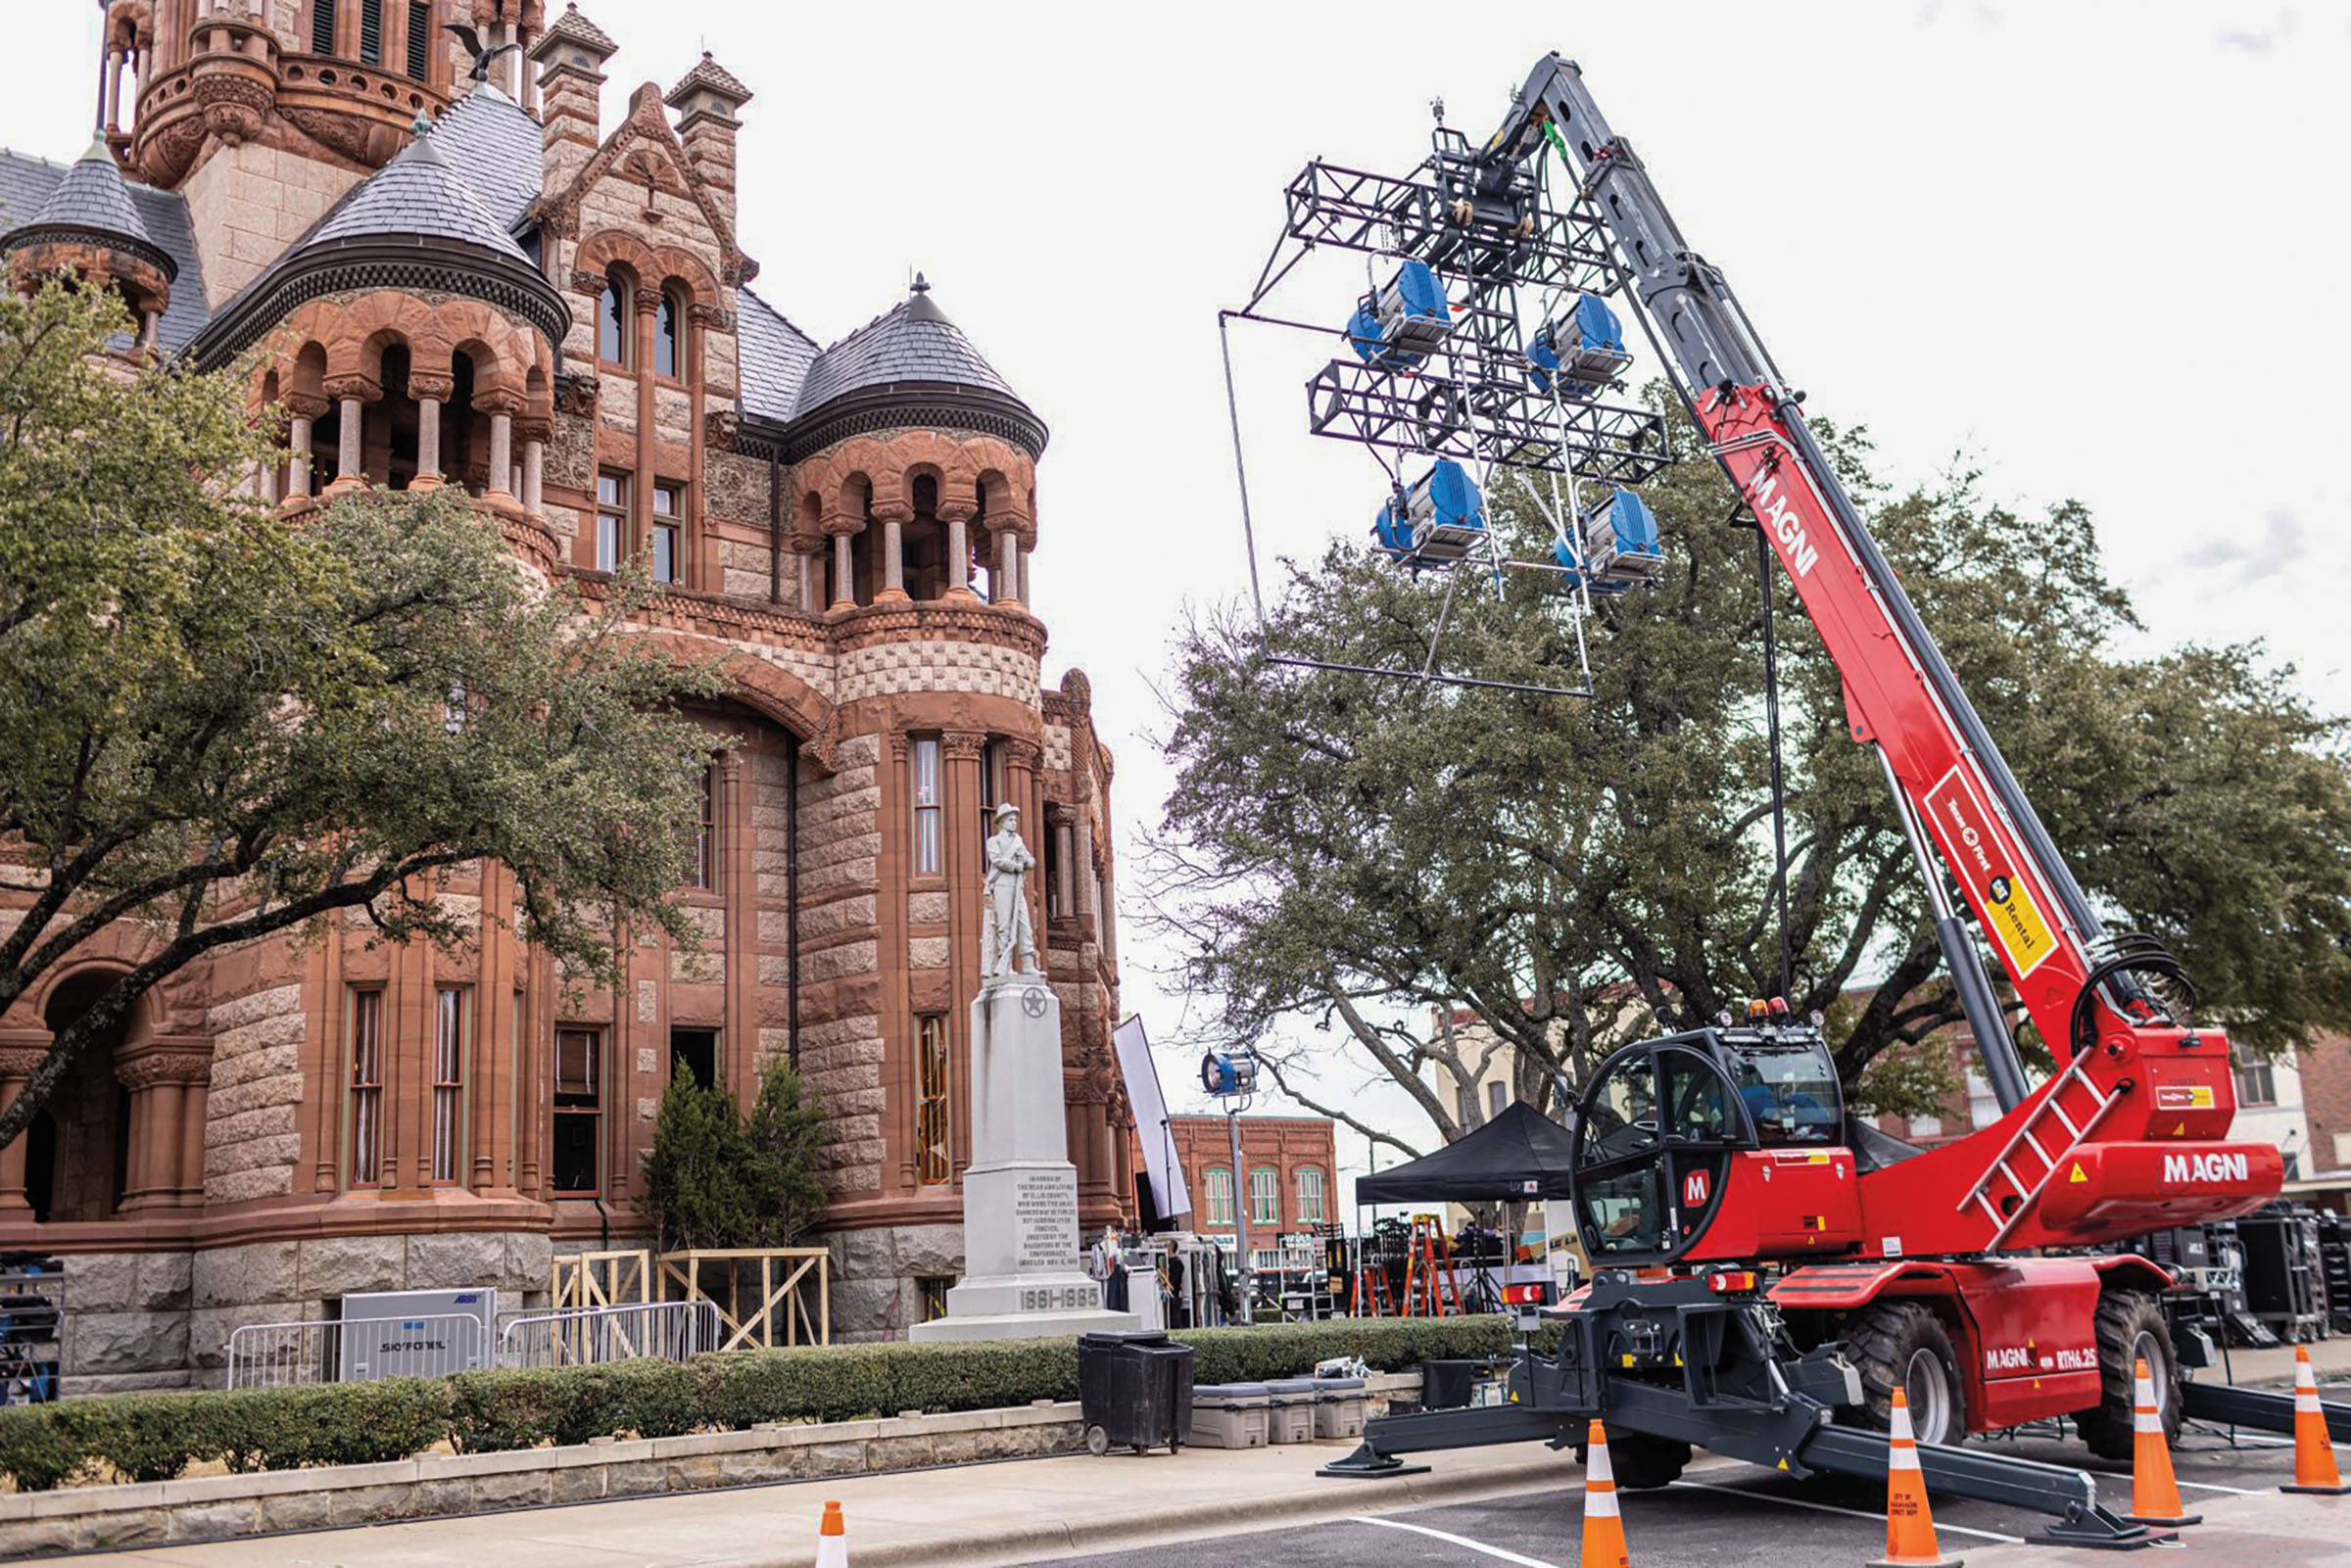 A large red boom truck moves filming equipment near an old brick courthouse